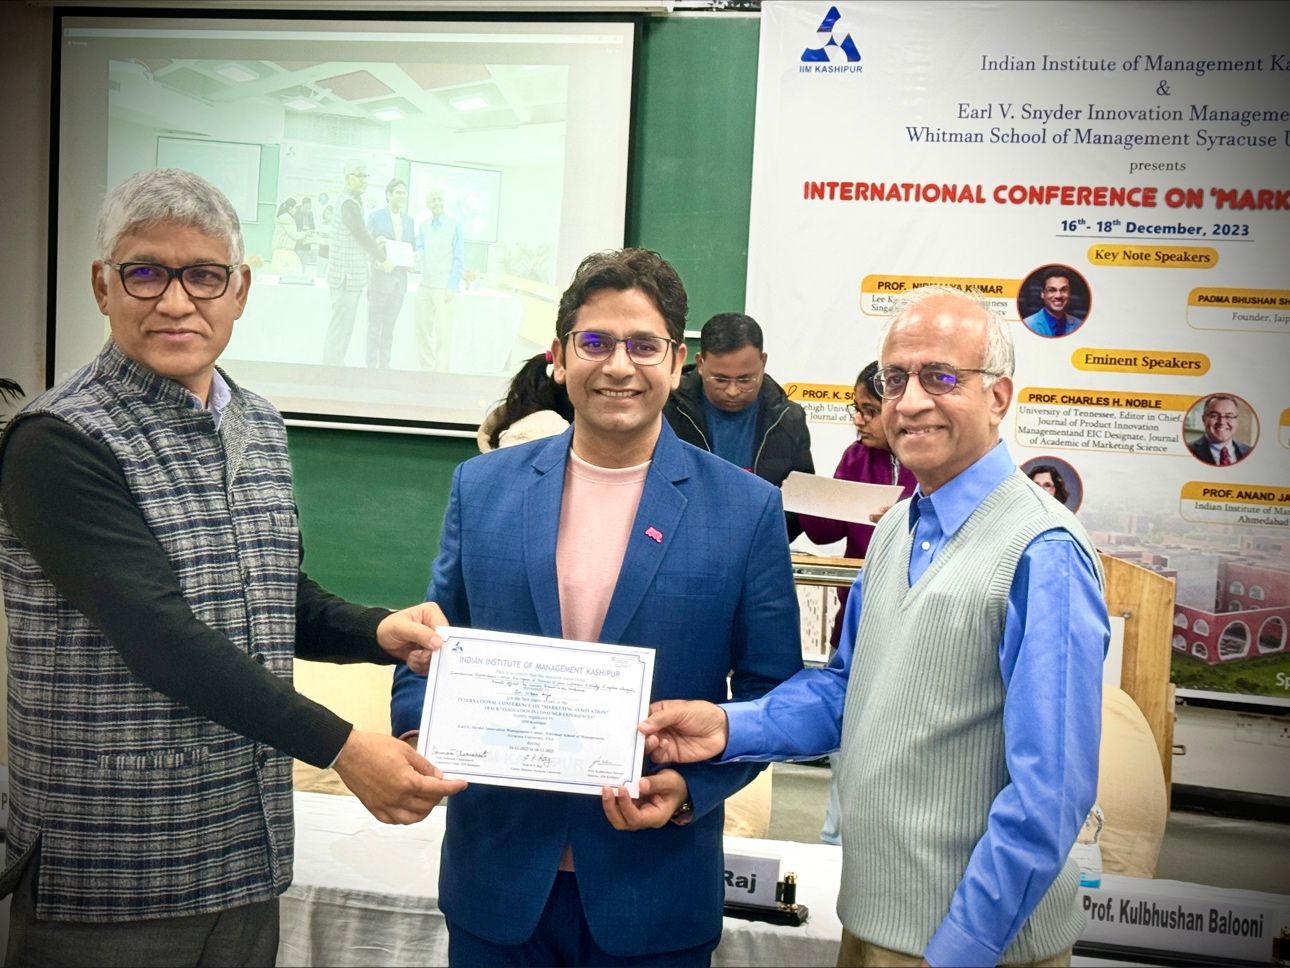 Dr. Vikas Arya recieved best paper award at International Conference hosted by Indian Institute of Management, Kashipur, India during 16-18 December 2023.